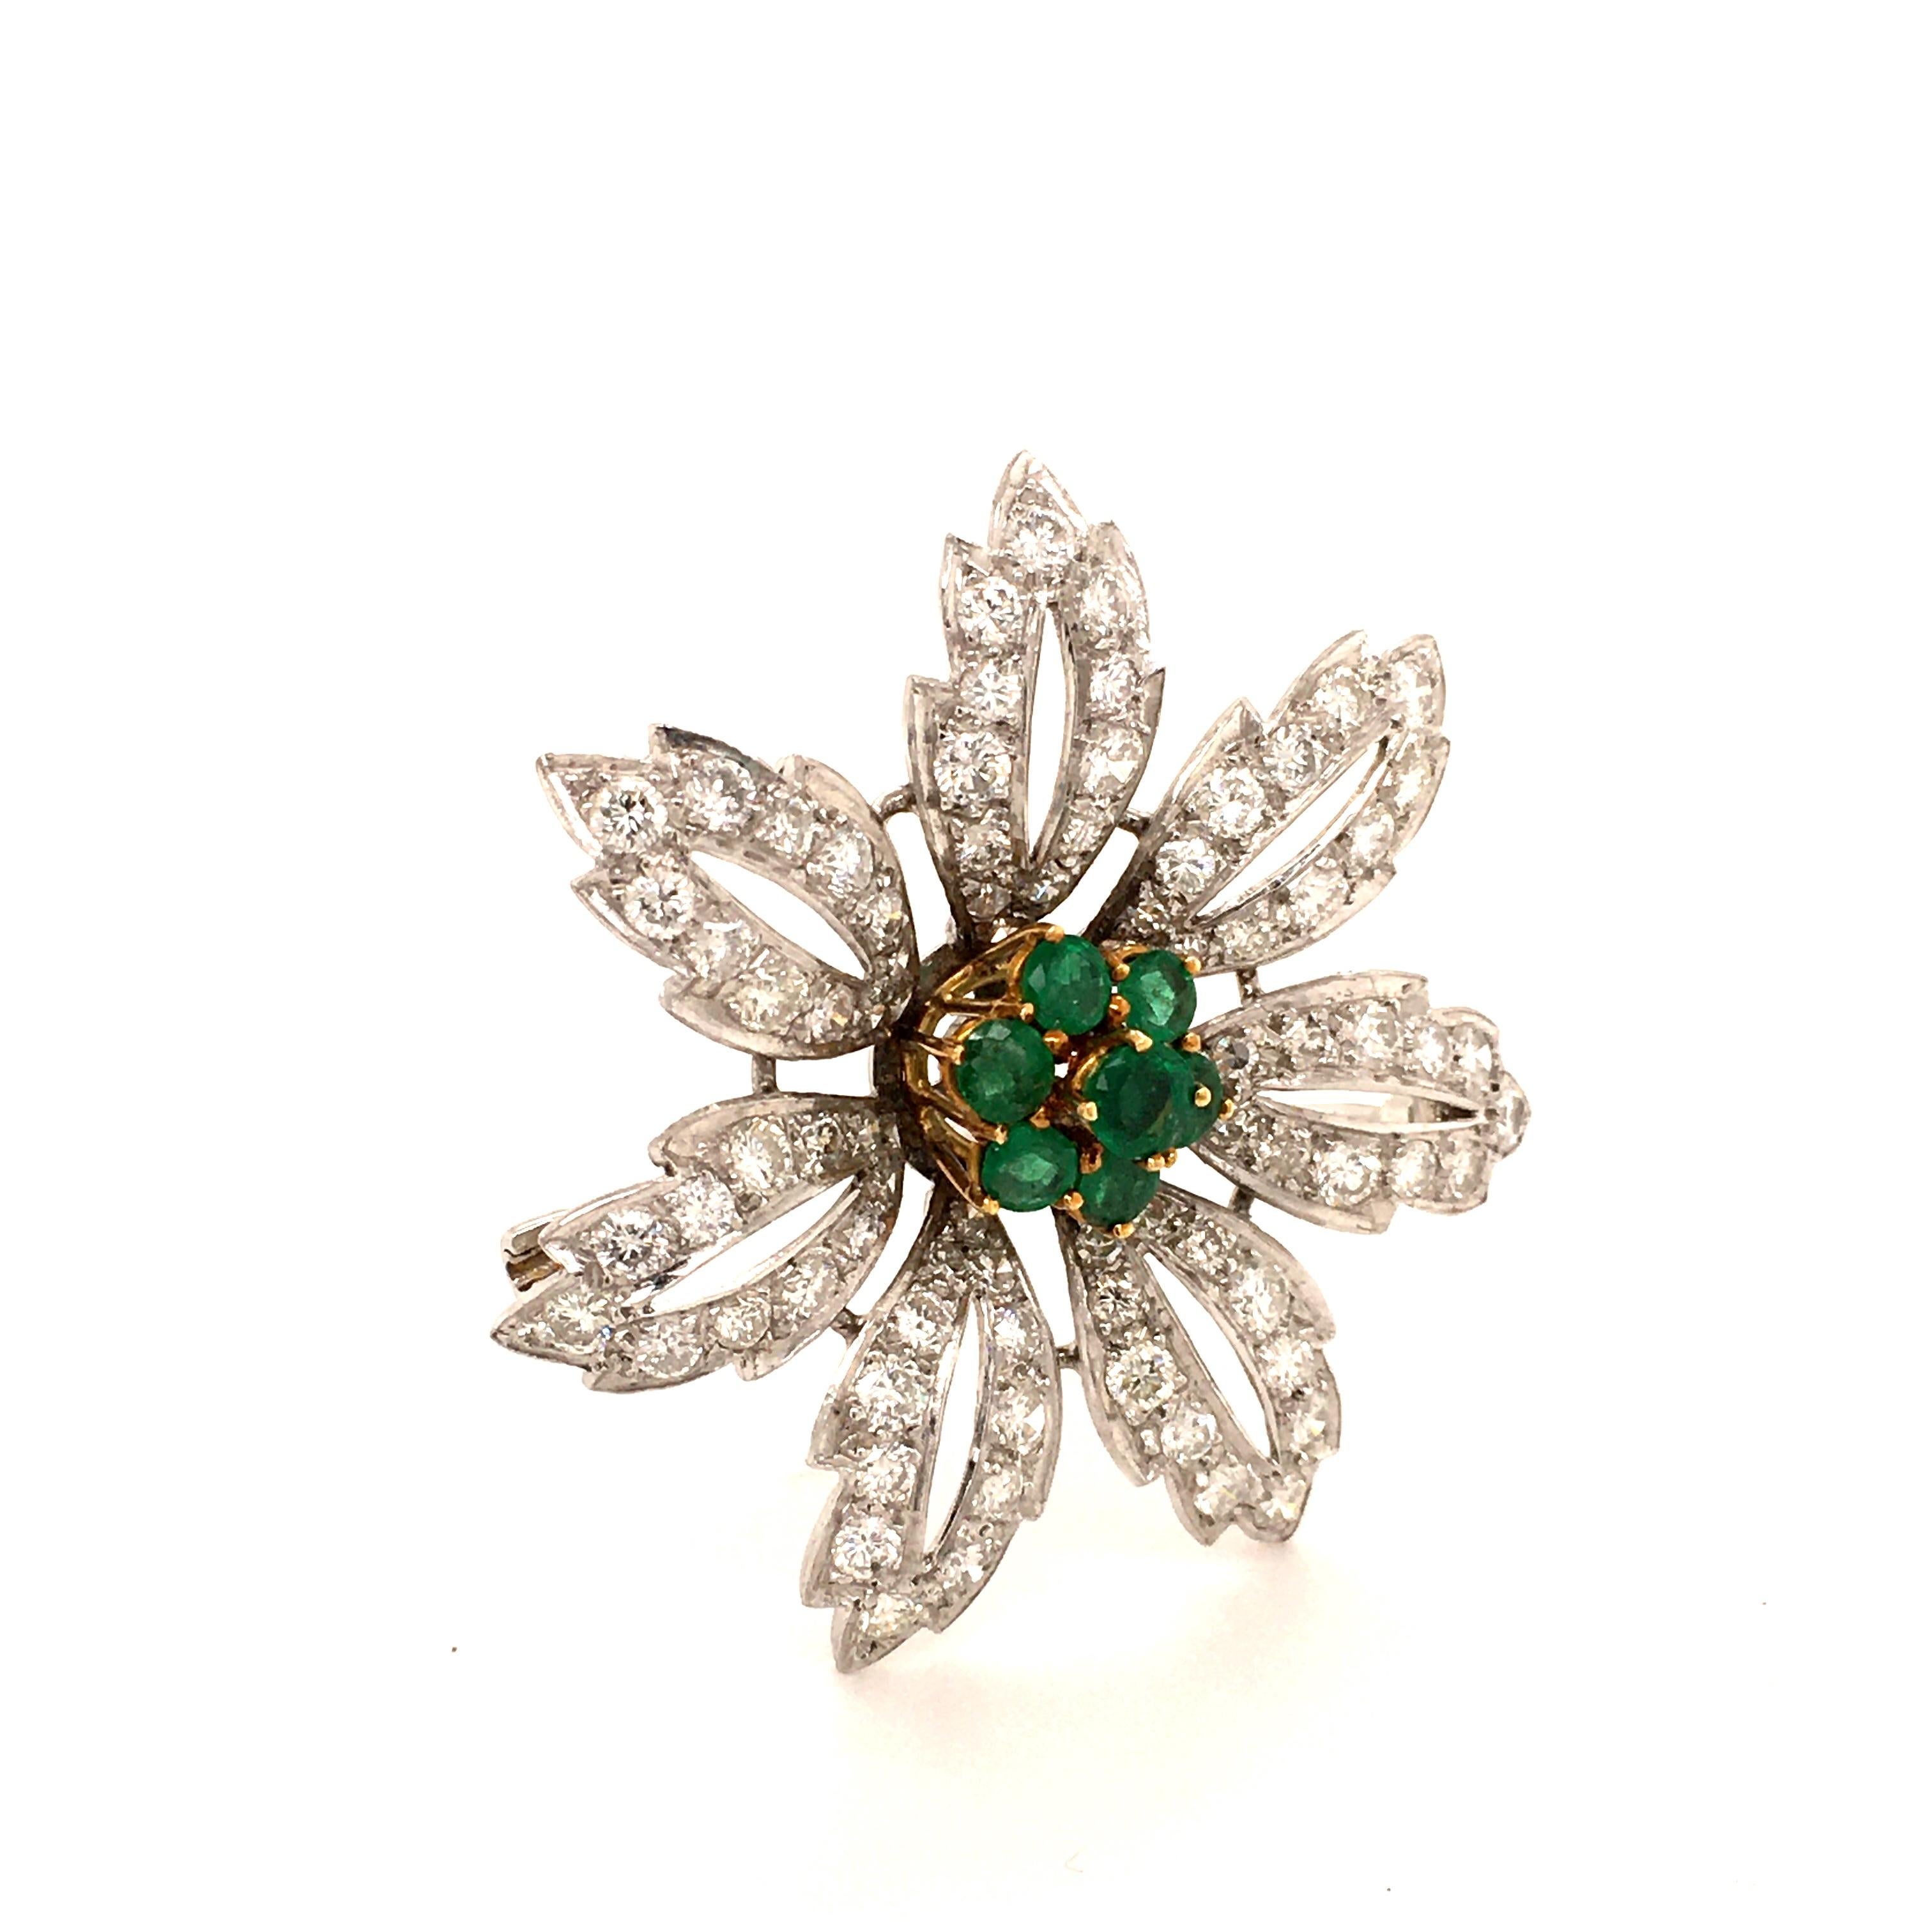 Contemporary Emerald and Diamond Flower Brooch in 14 Karat White and Yellow Gold